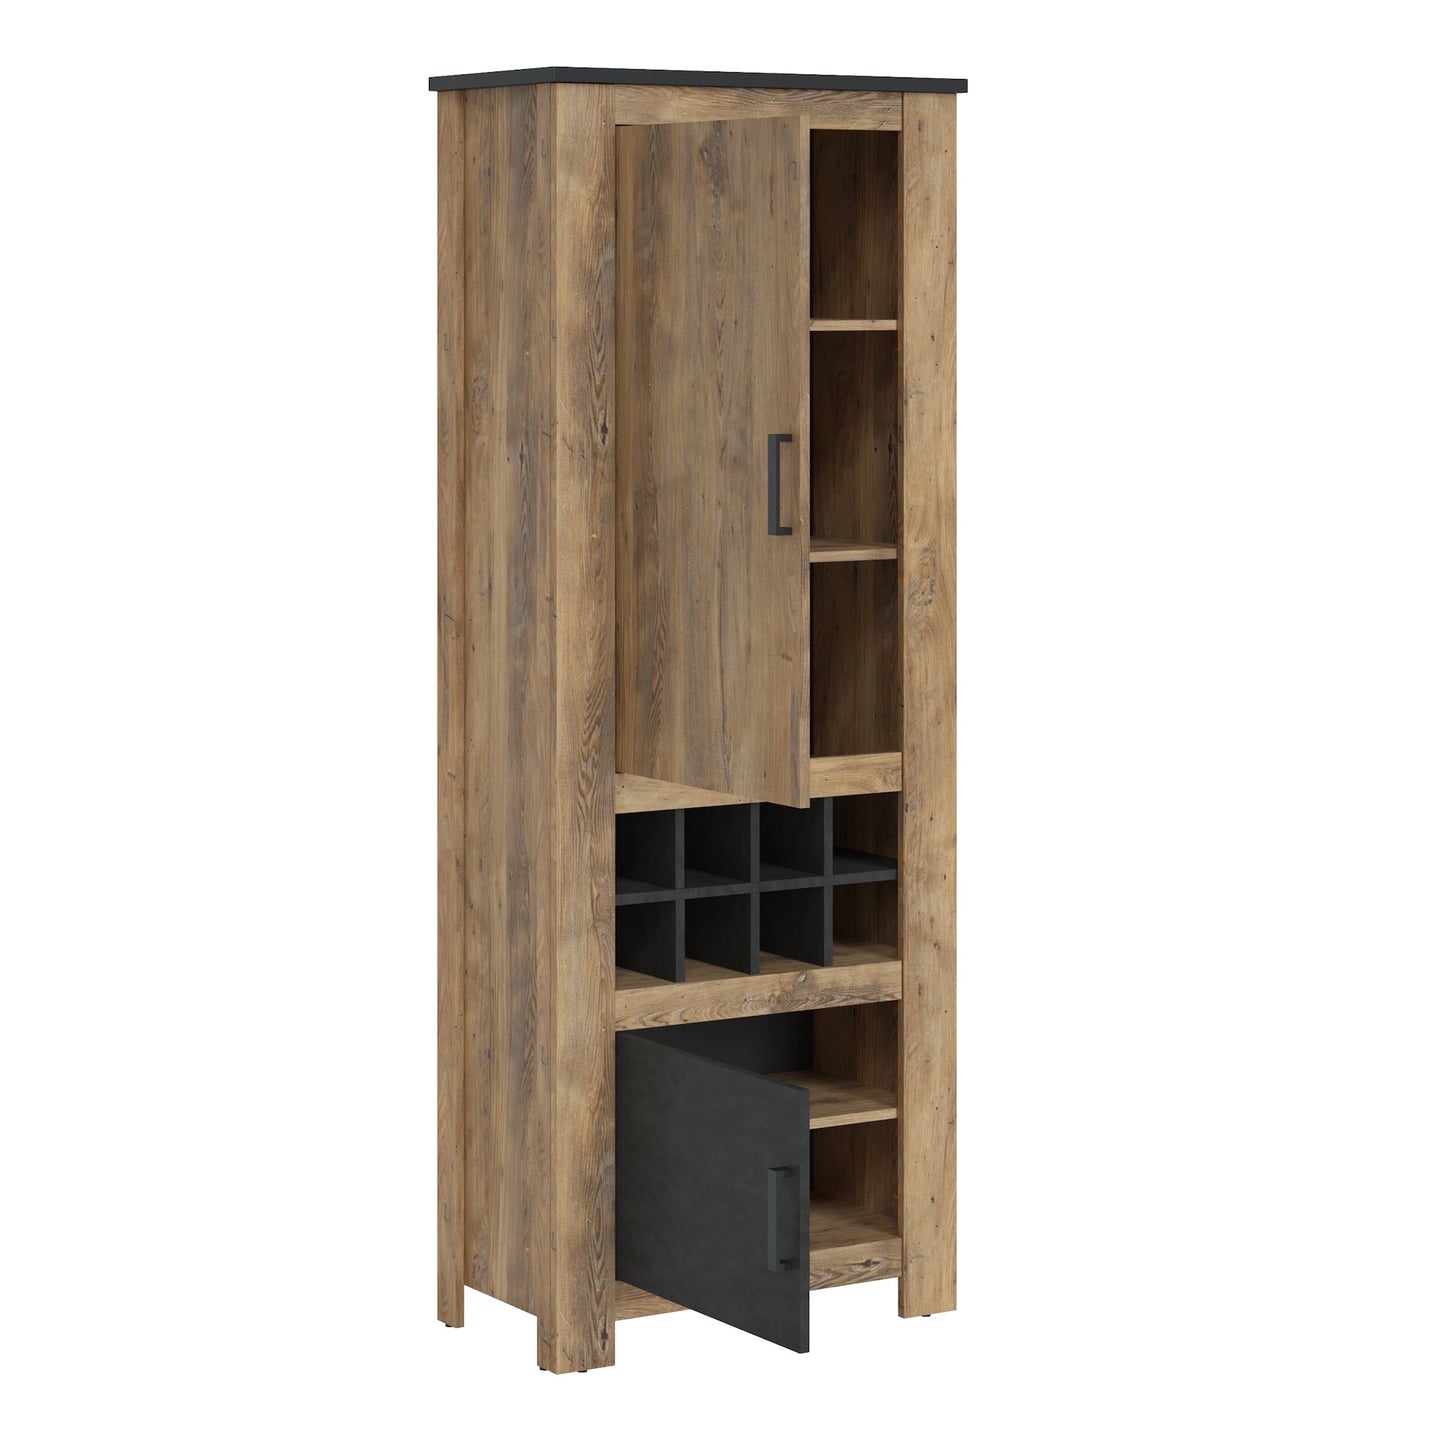 Furniture To Go Rapallo 2 Door Cabinet with Wine Rack in Chestnut & Matera Grey